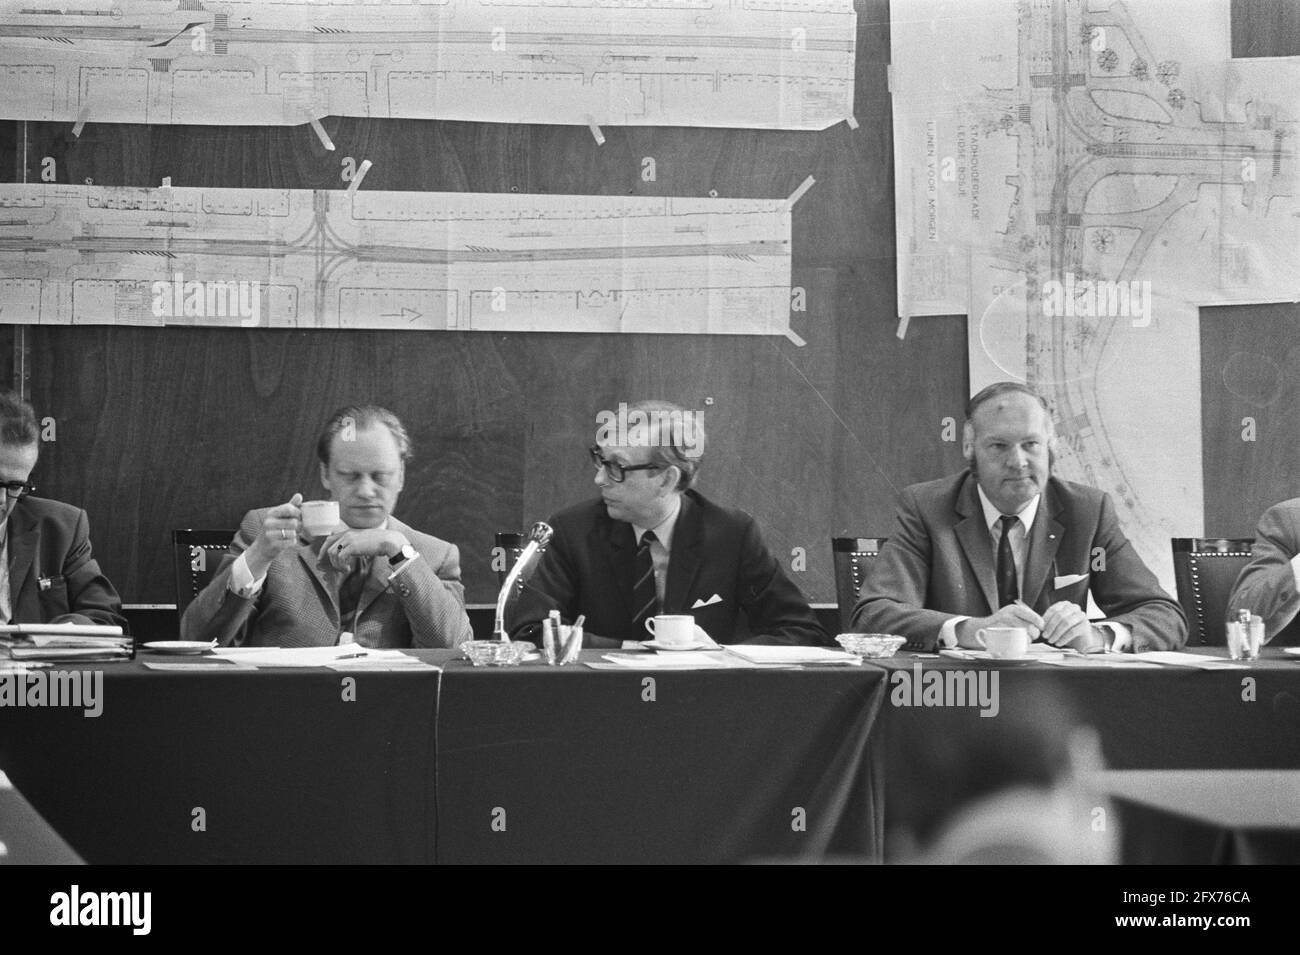 In the council chamber, in the middle alderman Brautigam, May 24, 1971, town halls, public transportation, press conferences, aldermen, The Netherlands, 20th century press agency photo, news to remember, documentary, historic photography 1945-1990, visual stories, human history of the Twentieth Century, capturing moments in time Stock Photo